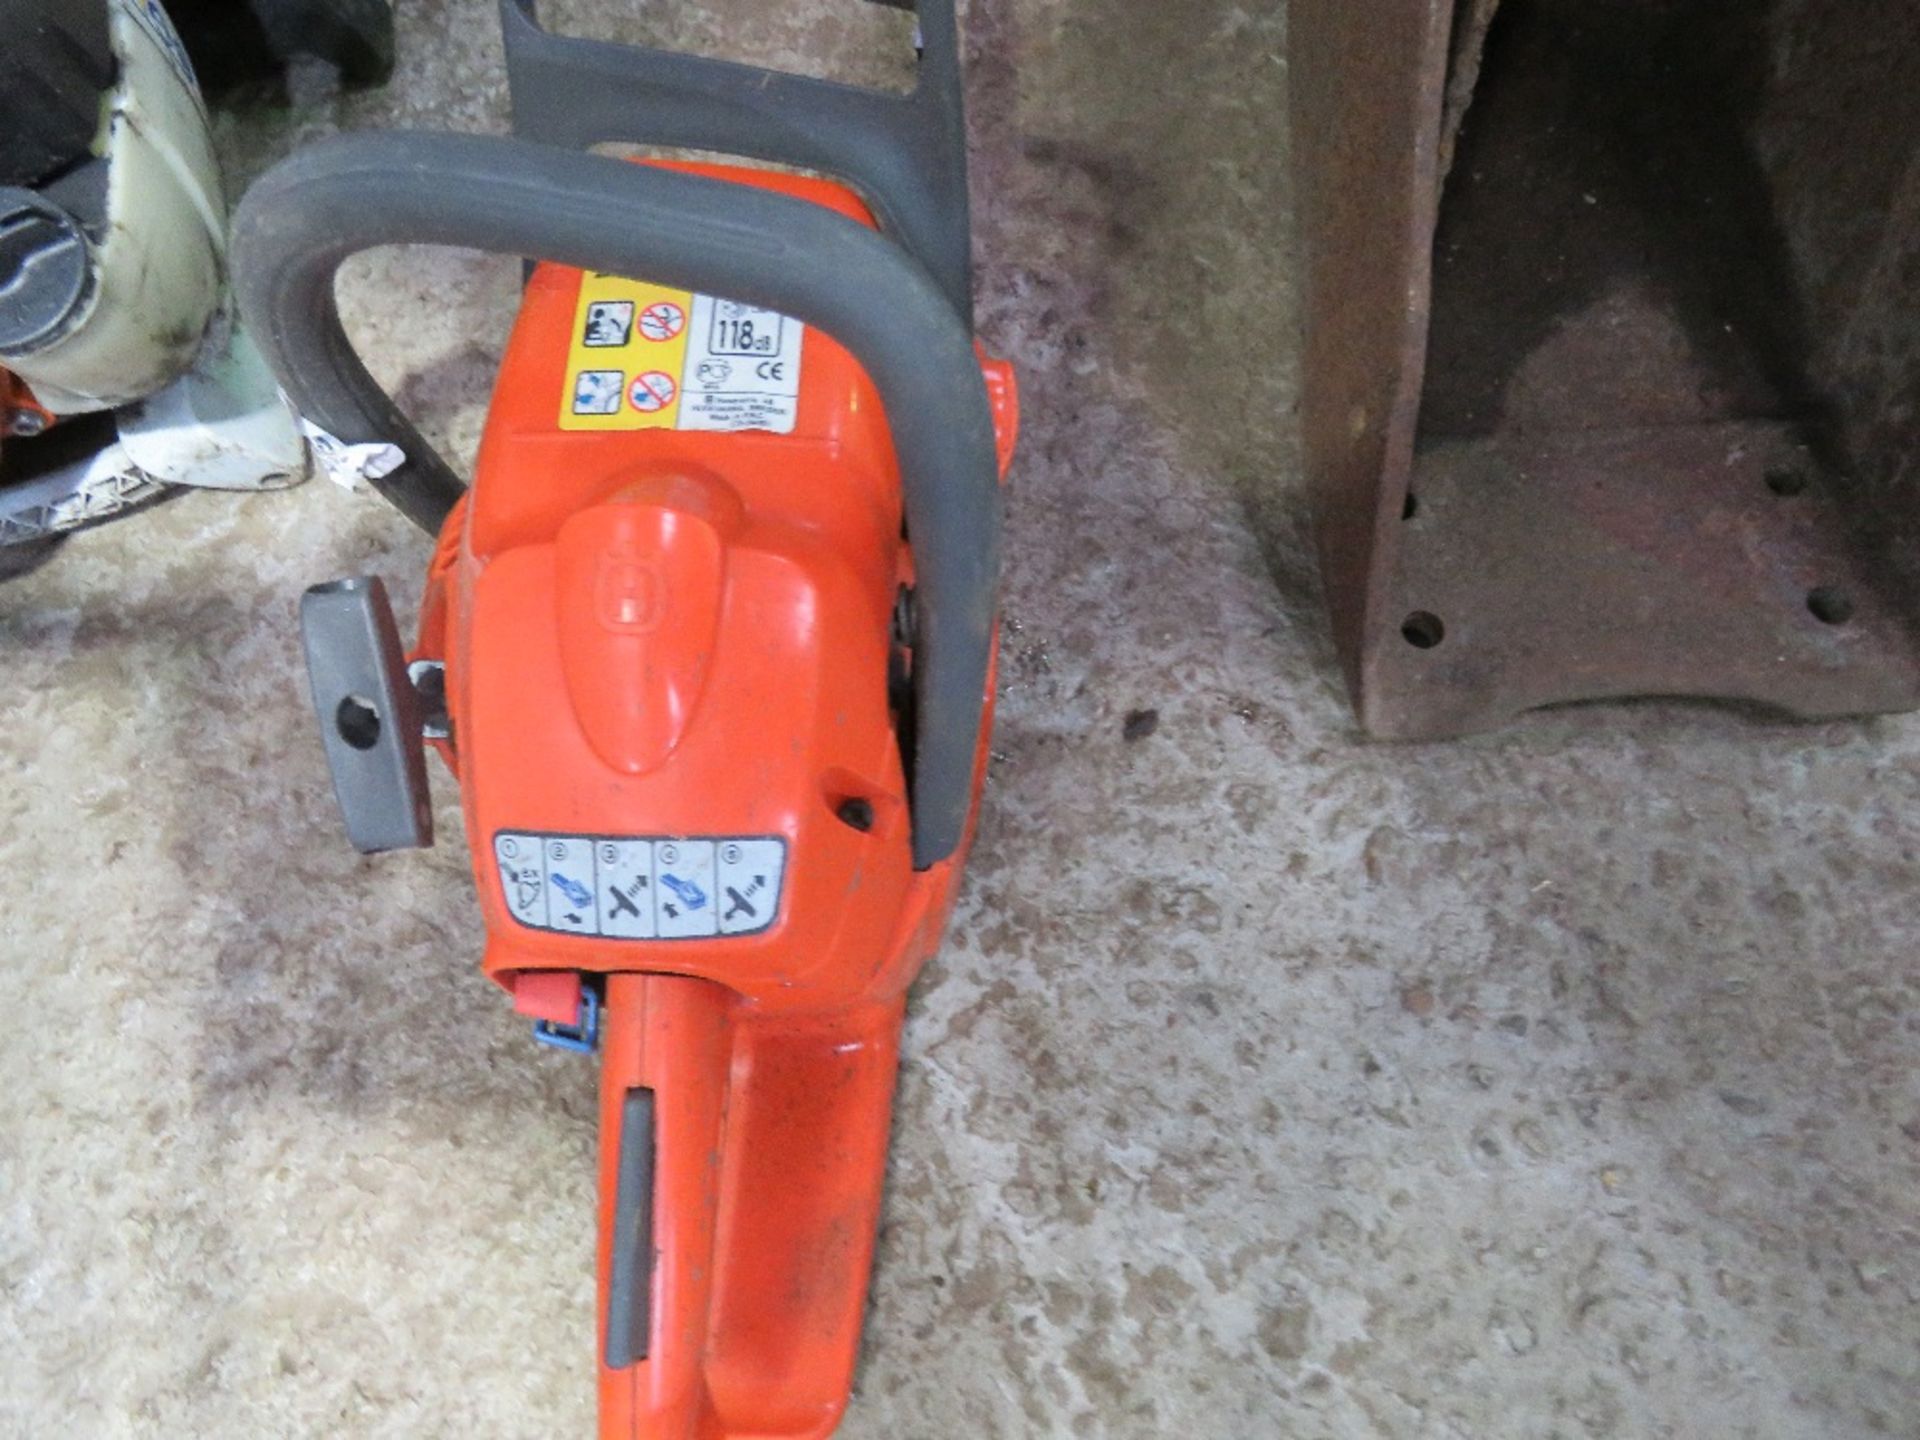 HUSQVARNA 240 PETROL CHAINSAW. THIS LOT IS SOLD UNDER THE AUCTIONEERS MARGIN SCHEME, THEREFORE NO - Image 4 of 4